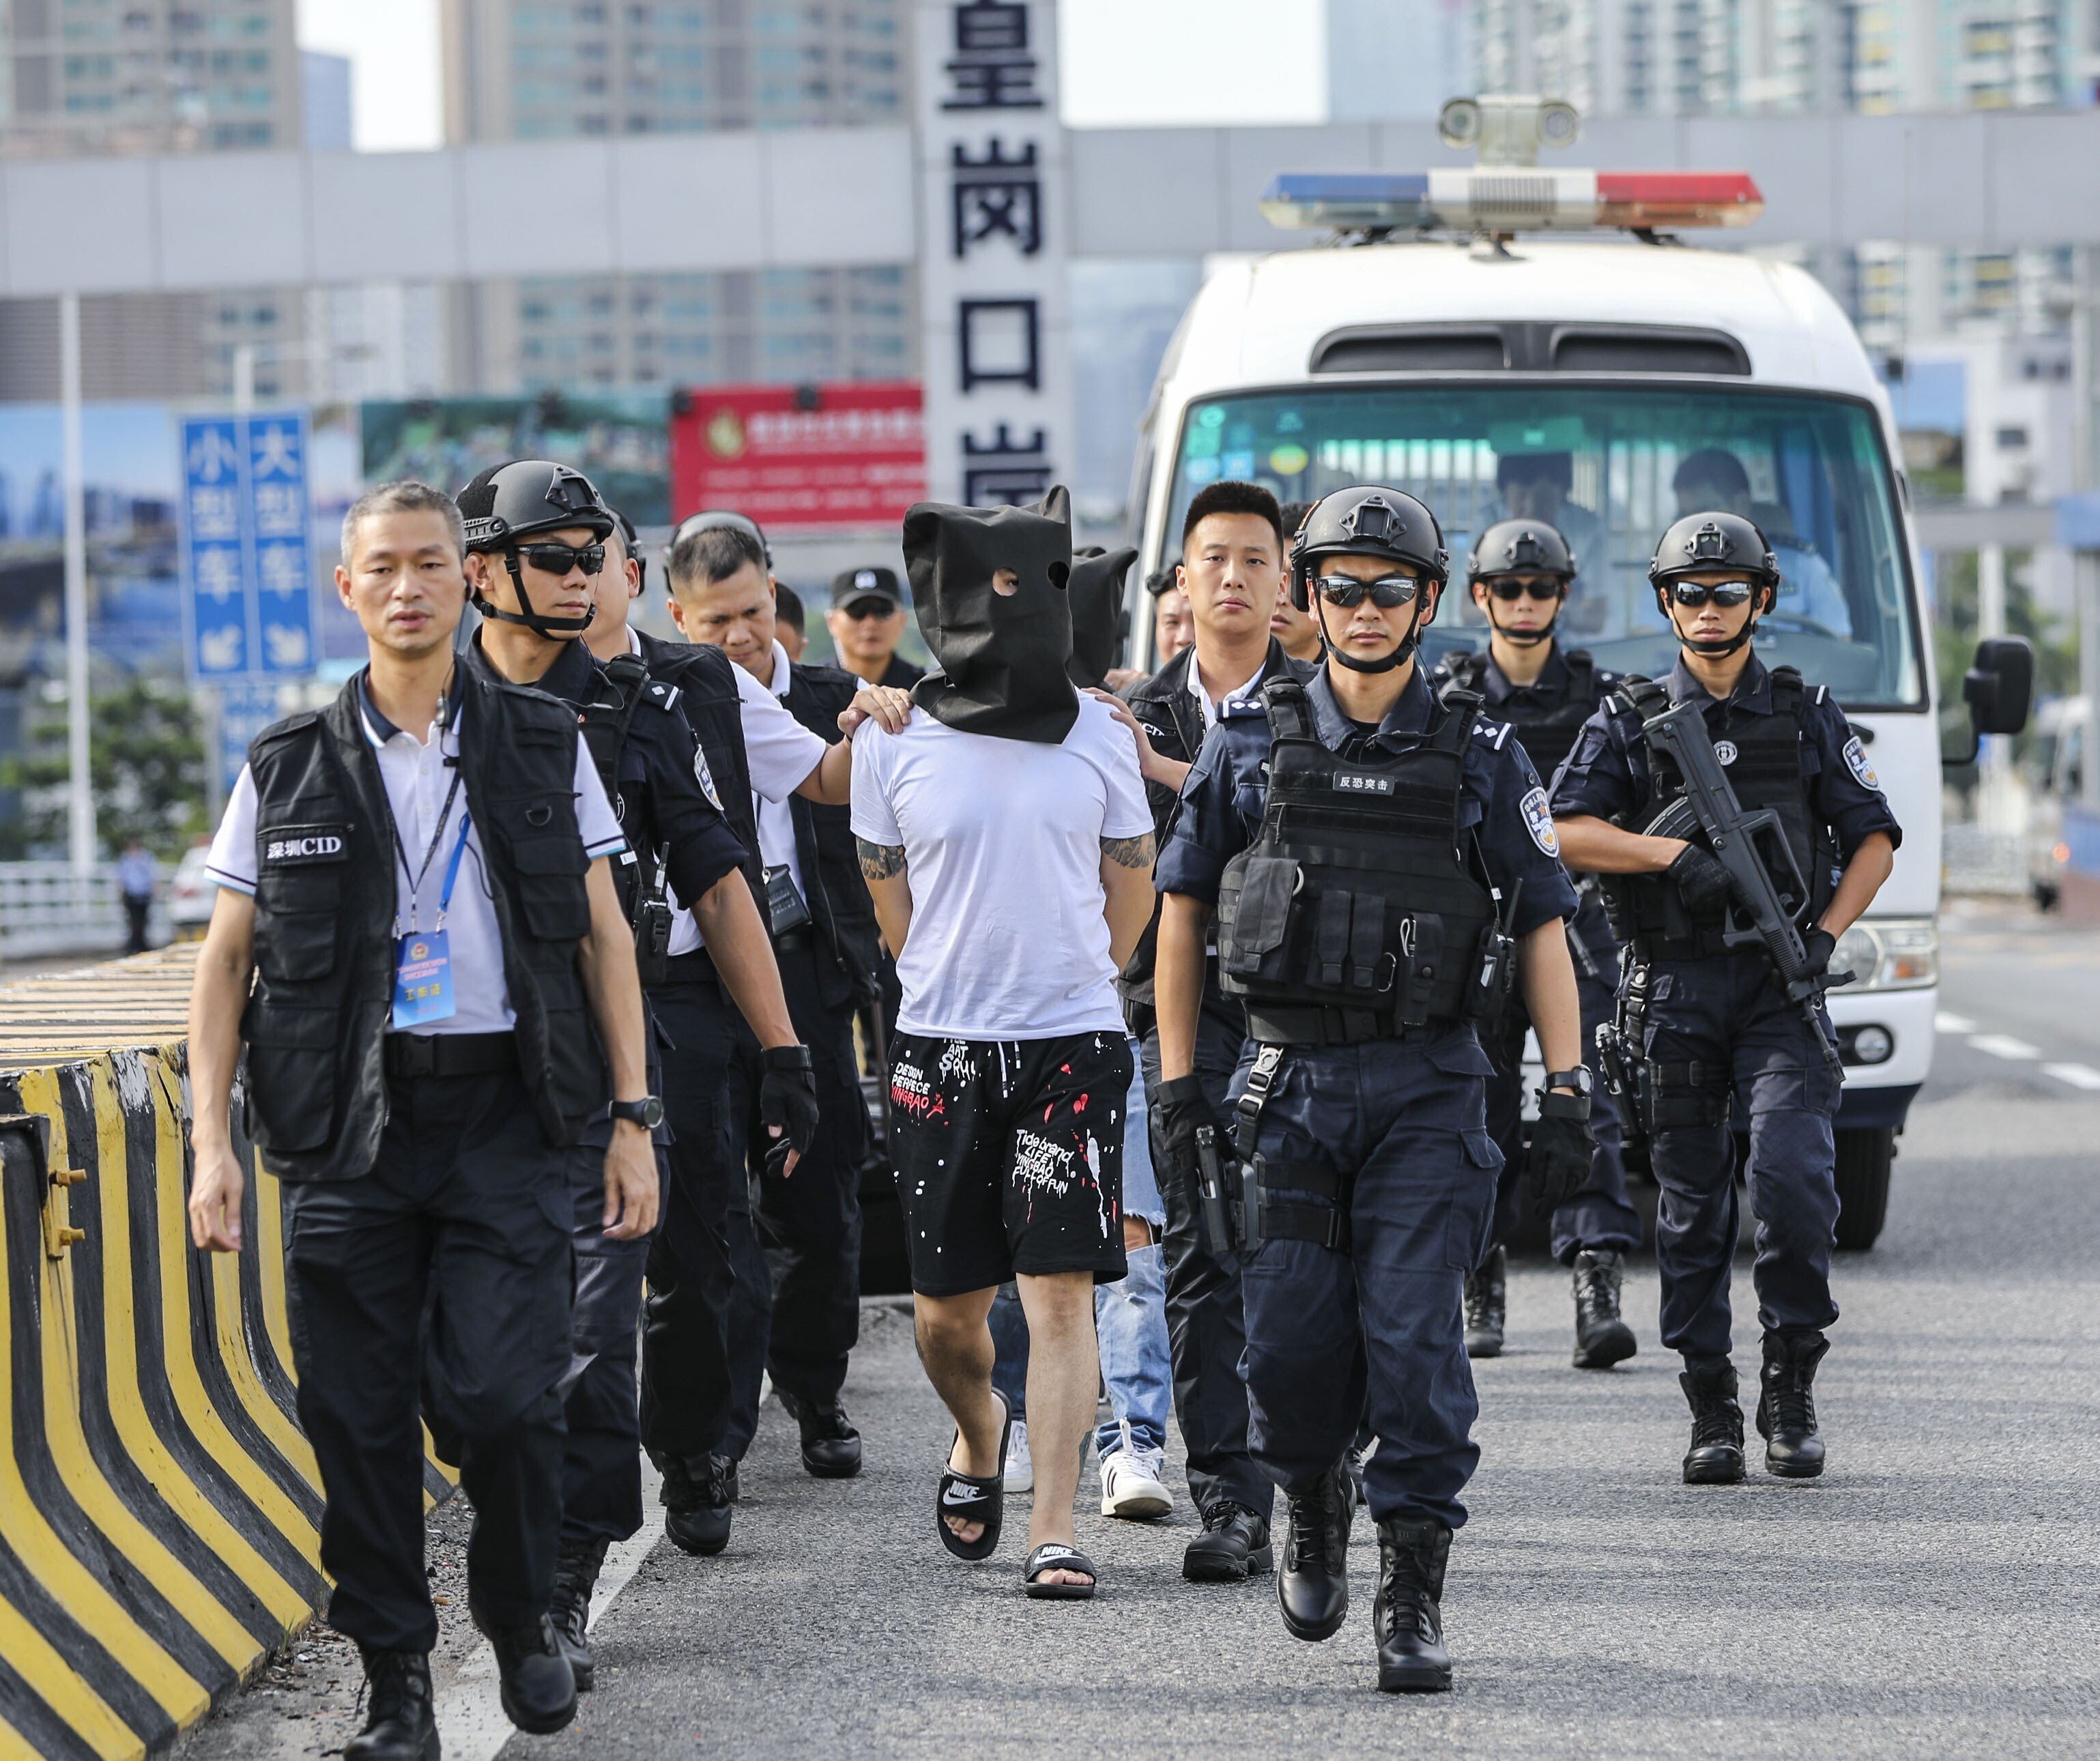 Mainland Chinese police hand over robbery suspects to Hong Kong authorities. The US often made use of its extradition deal with the city, which sent over 69 fugitives at Washington’s request. Photo: Edward Wong